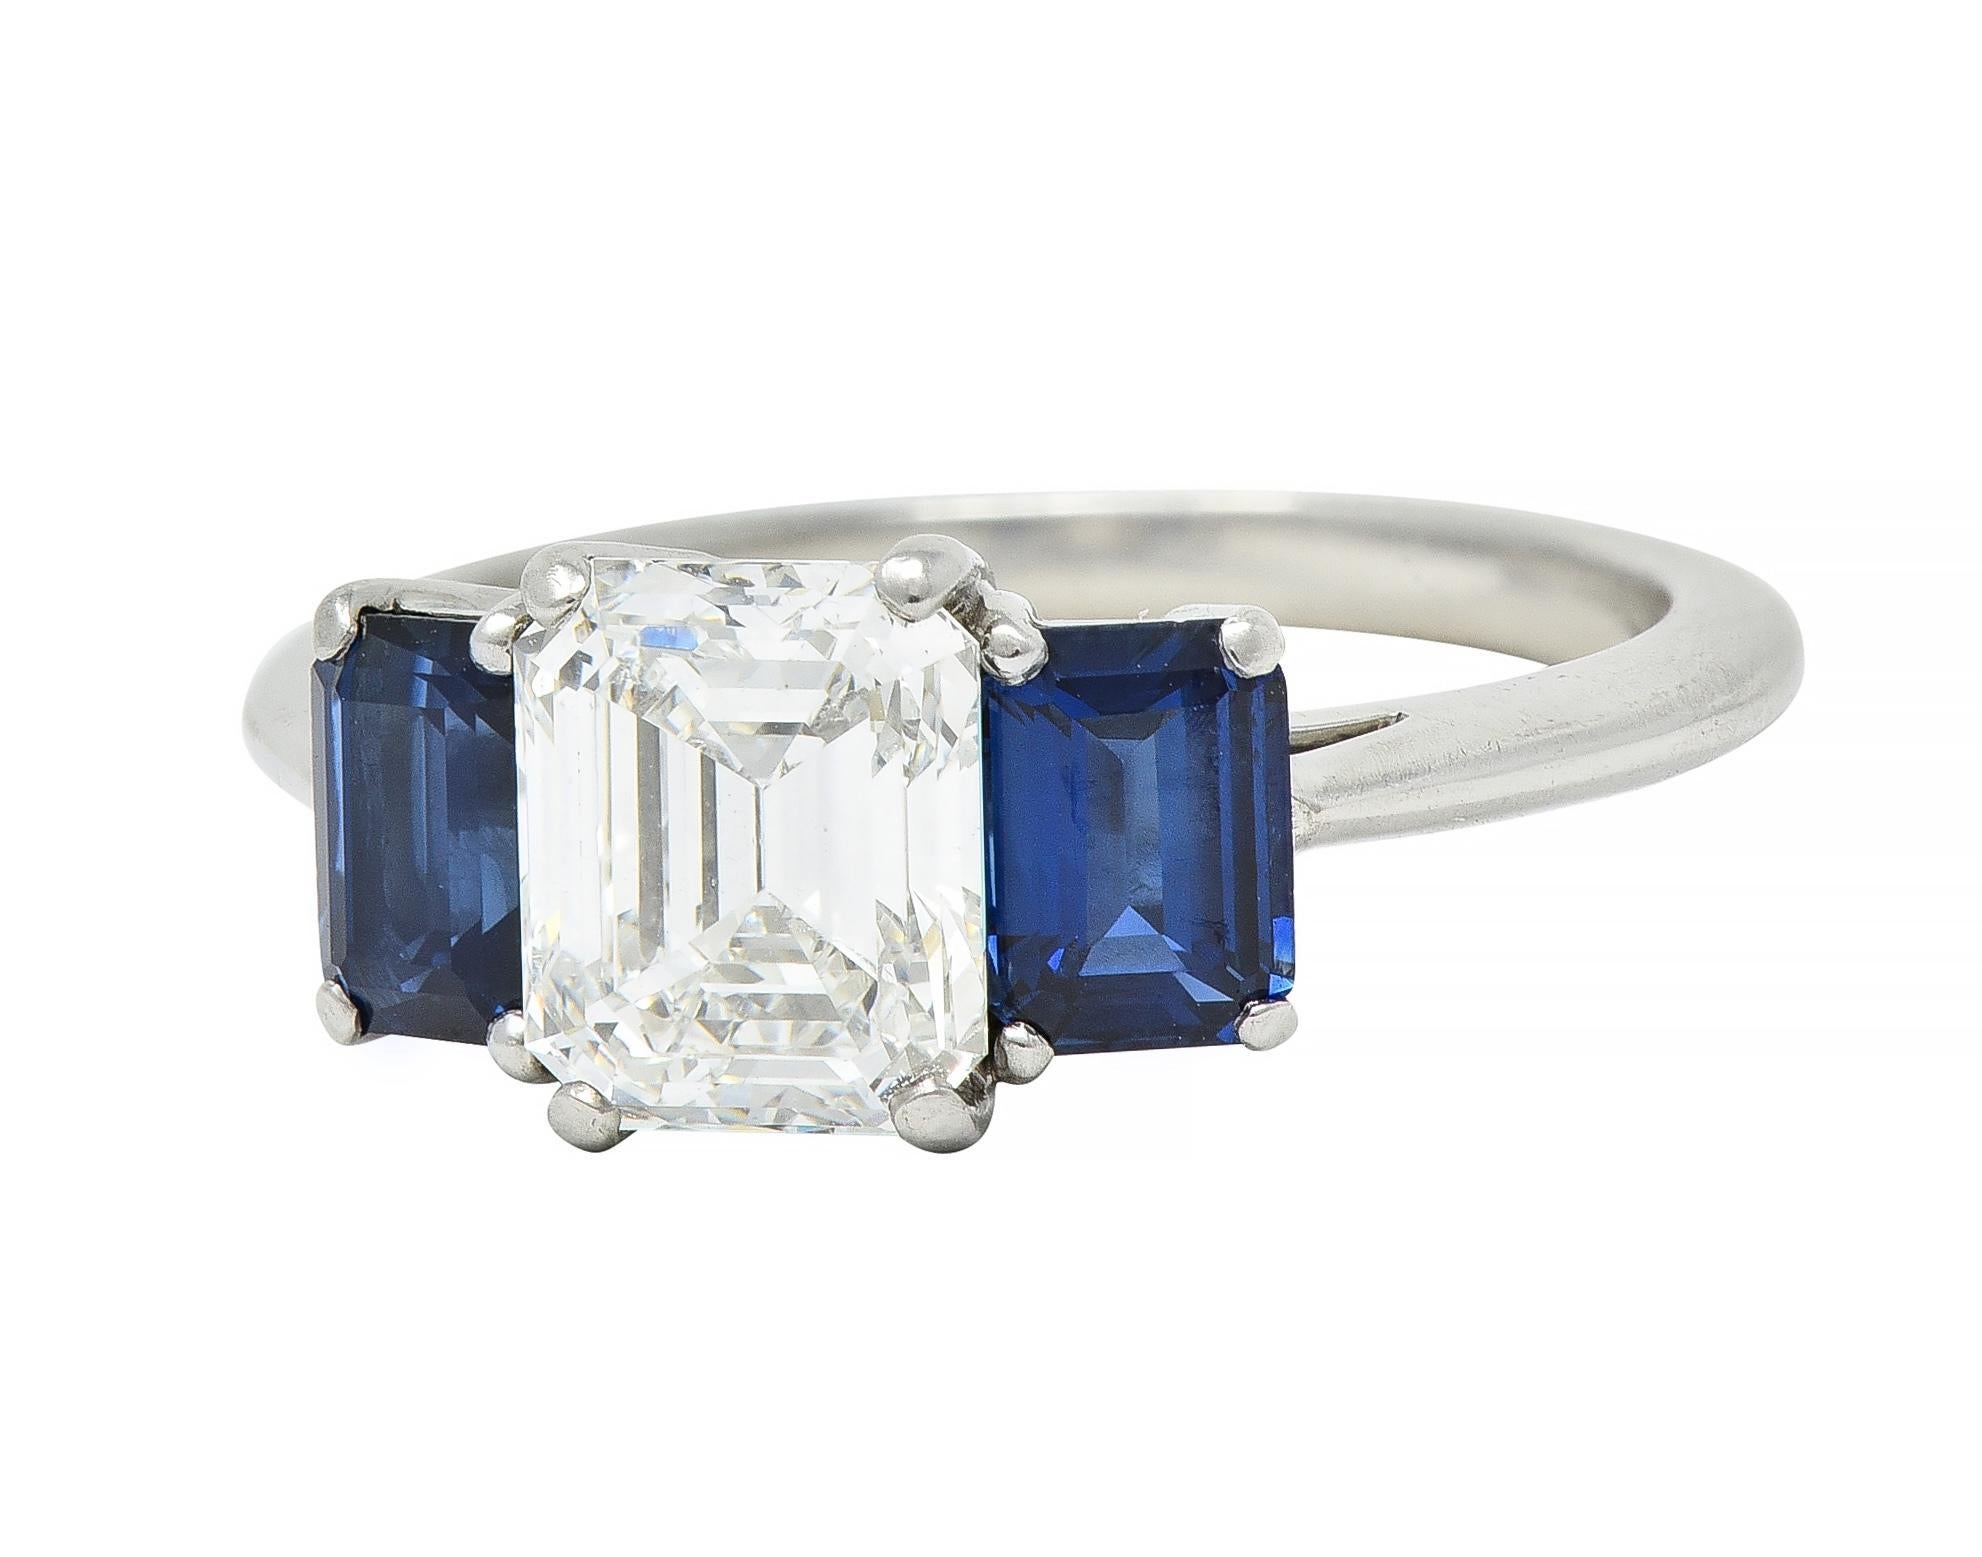 Tiffany & Co. 2.71 CTW Emerald Cut Diamond Sapphire Platinum Ring GIA In Excellent Condition For Sale In Philadelphia, PA